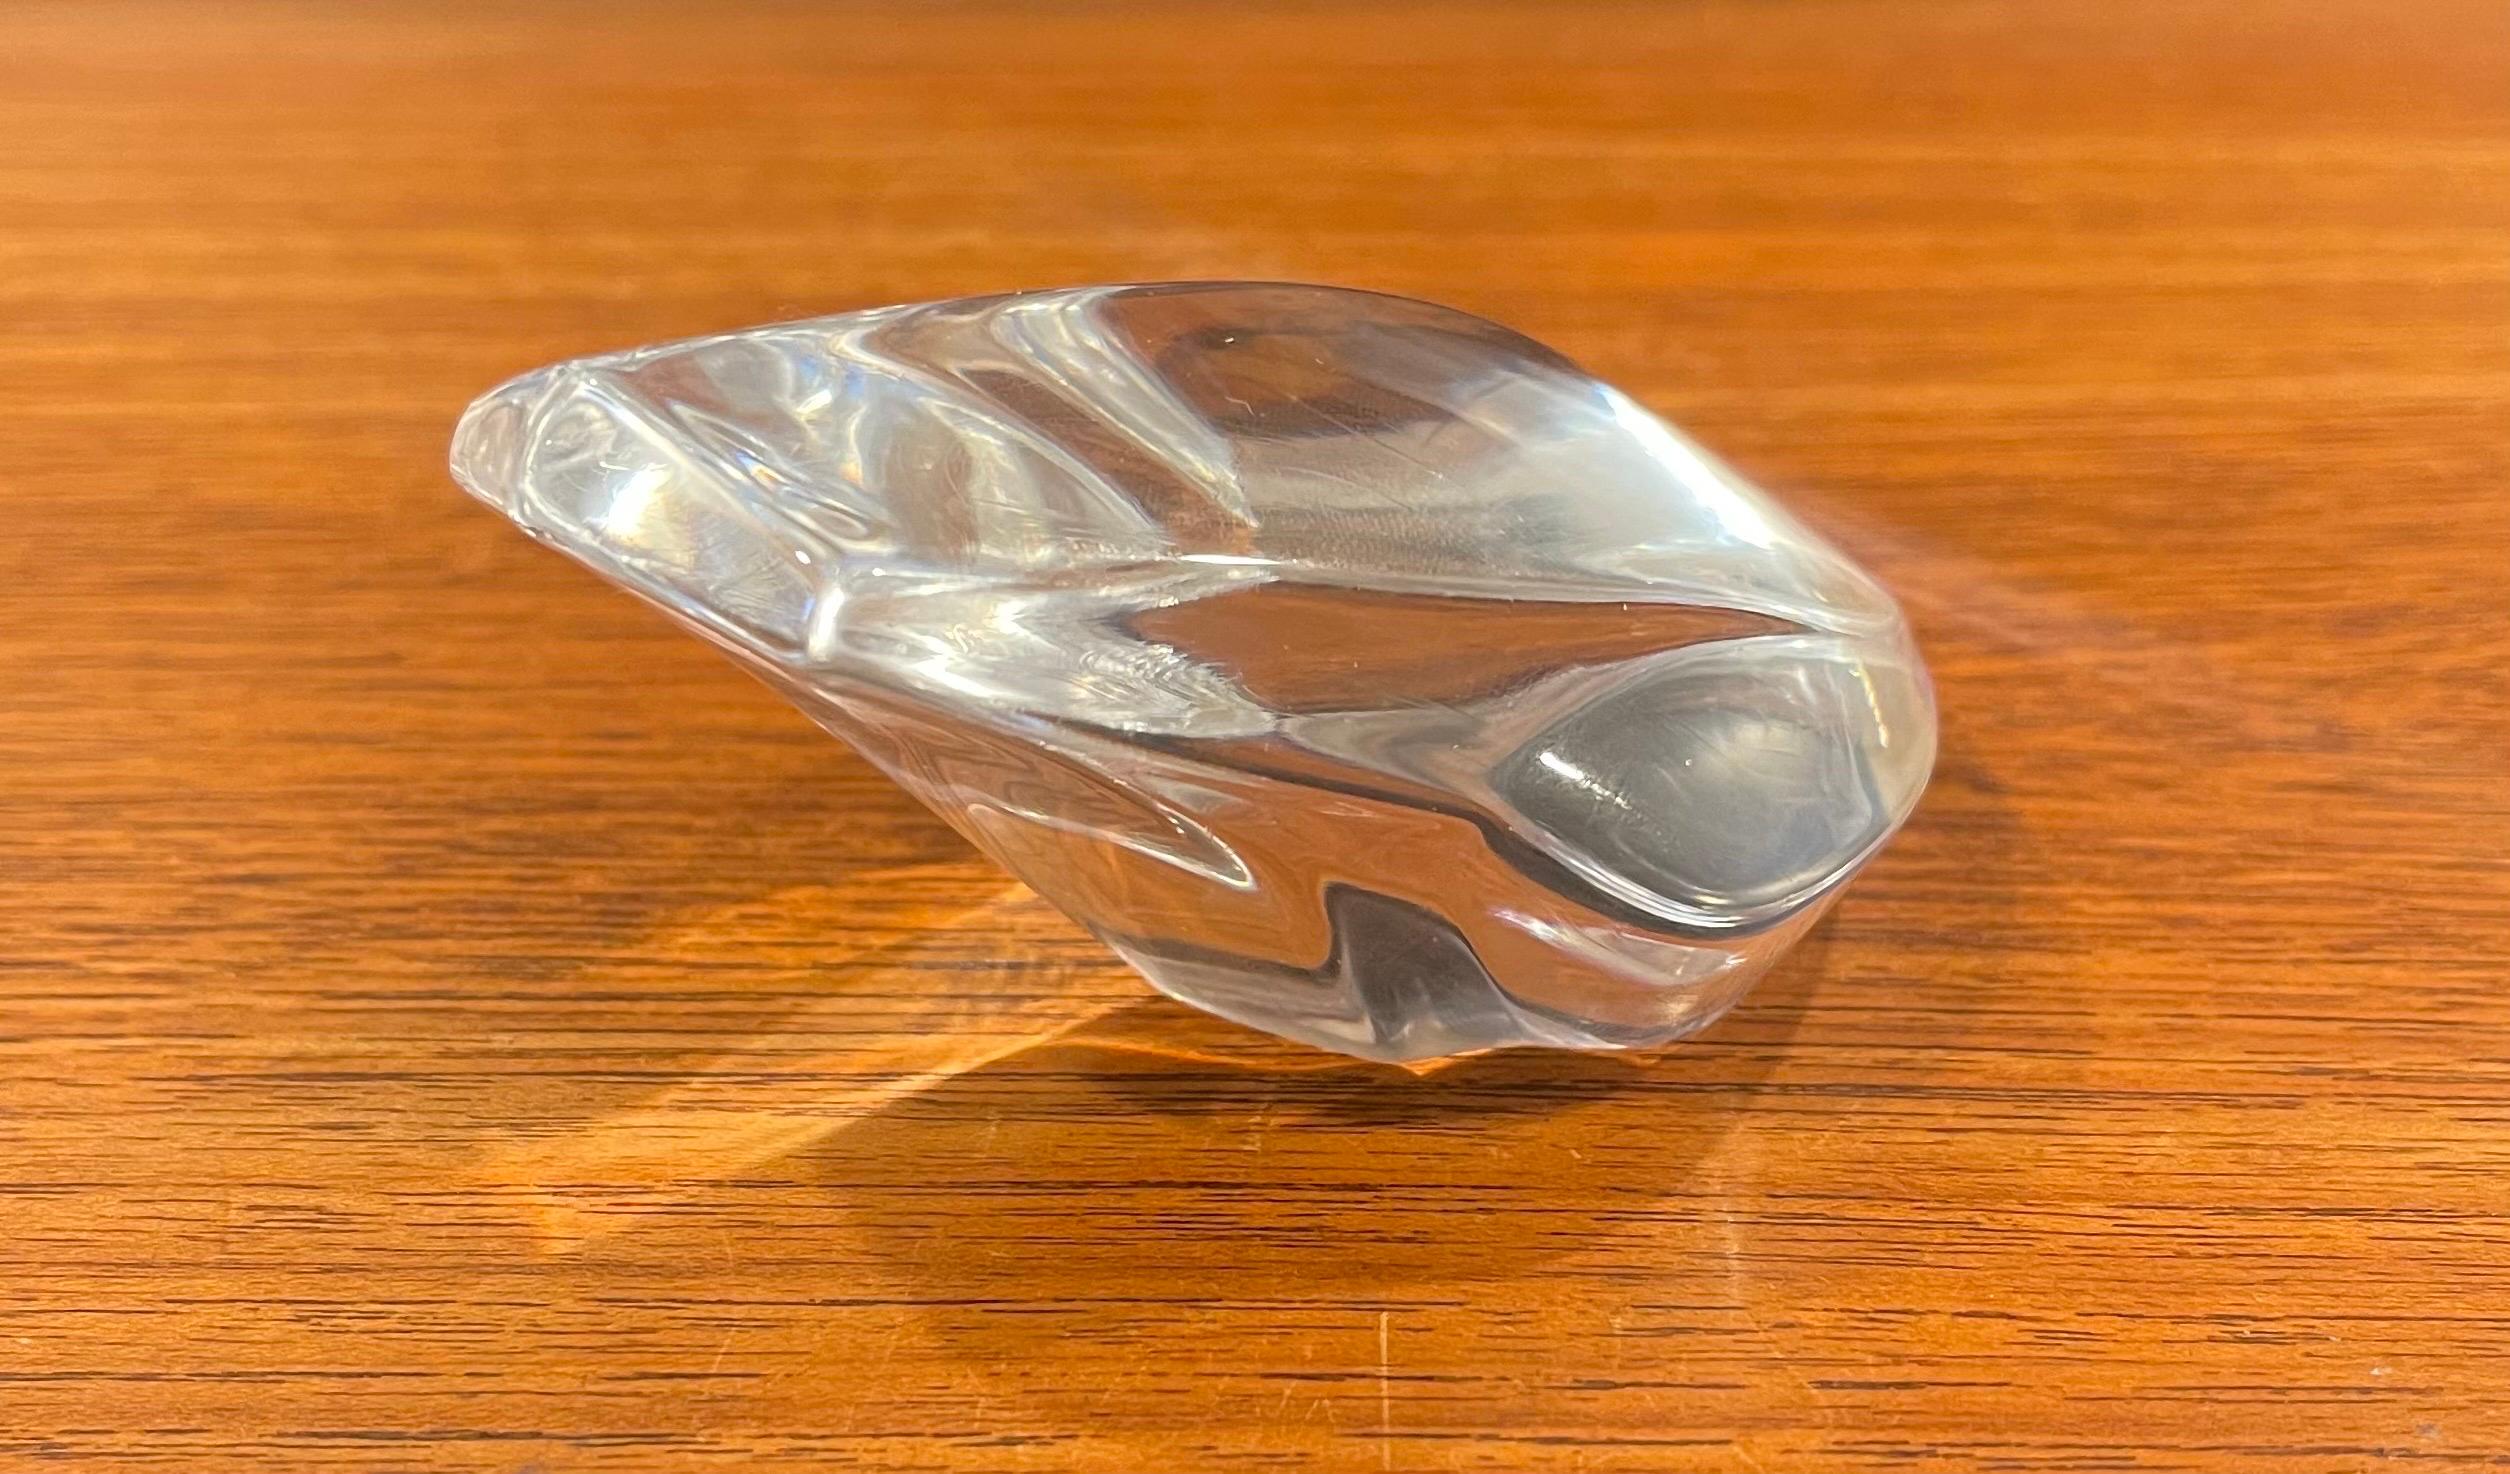 Gorgeous stylized crystal frog sculpture / paperweight, circa 1990s. The piece is in excellent condition with no visible imperfections and has great clarity. The piece measures 3.25